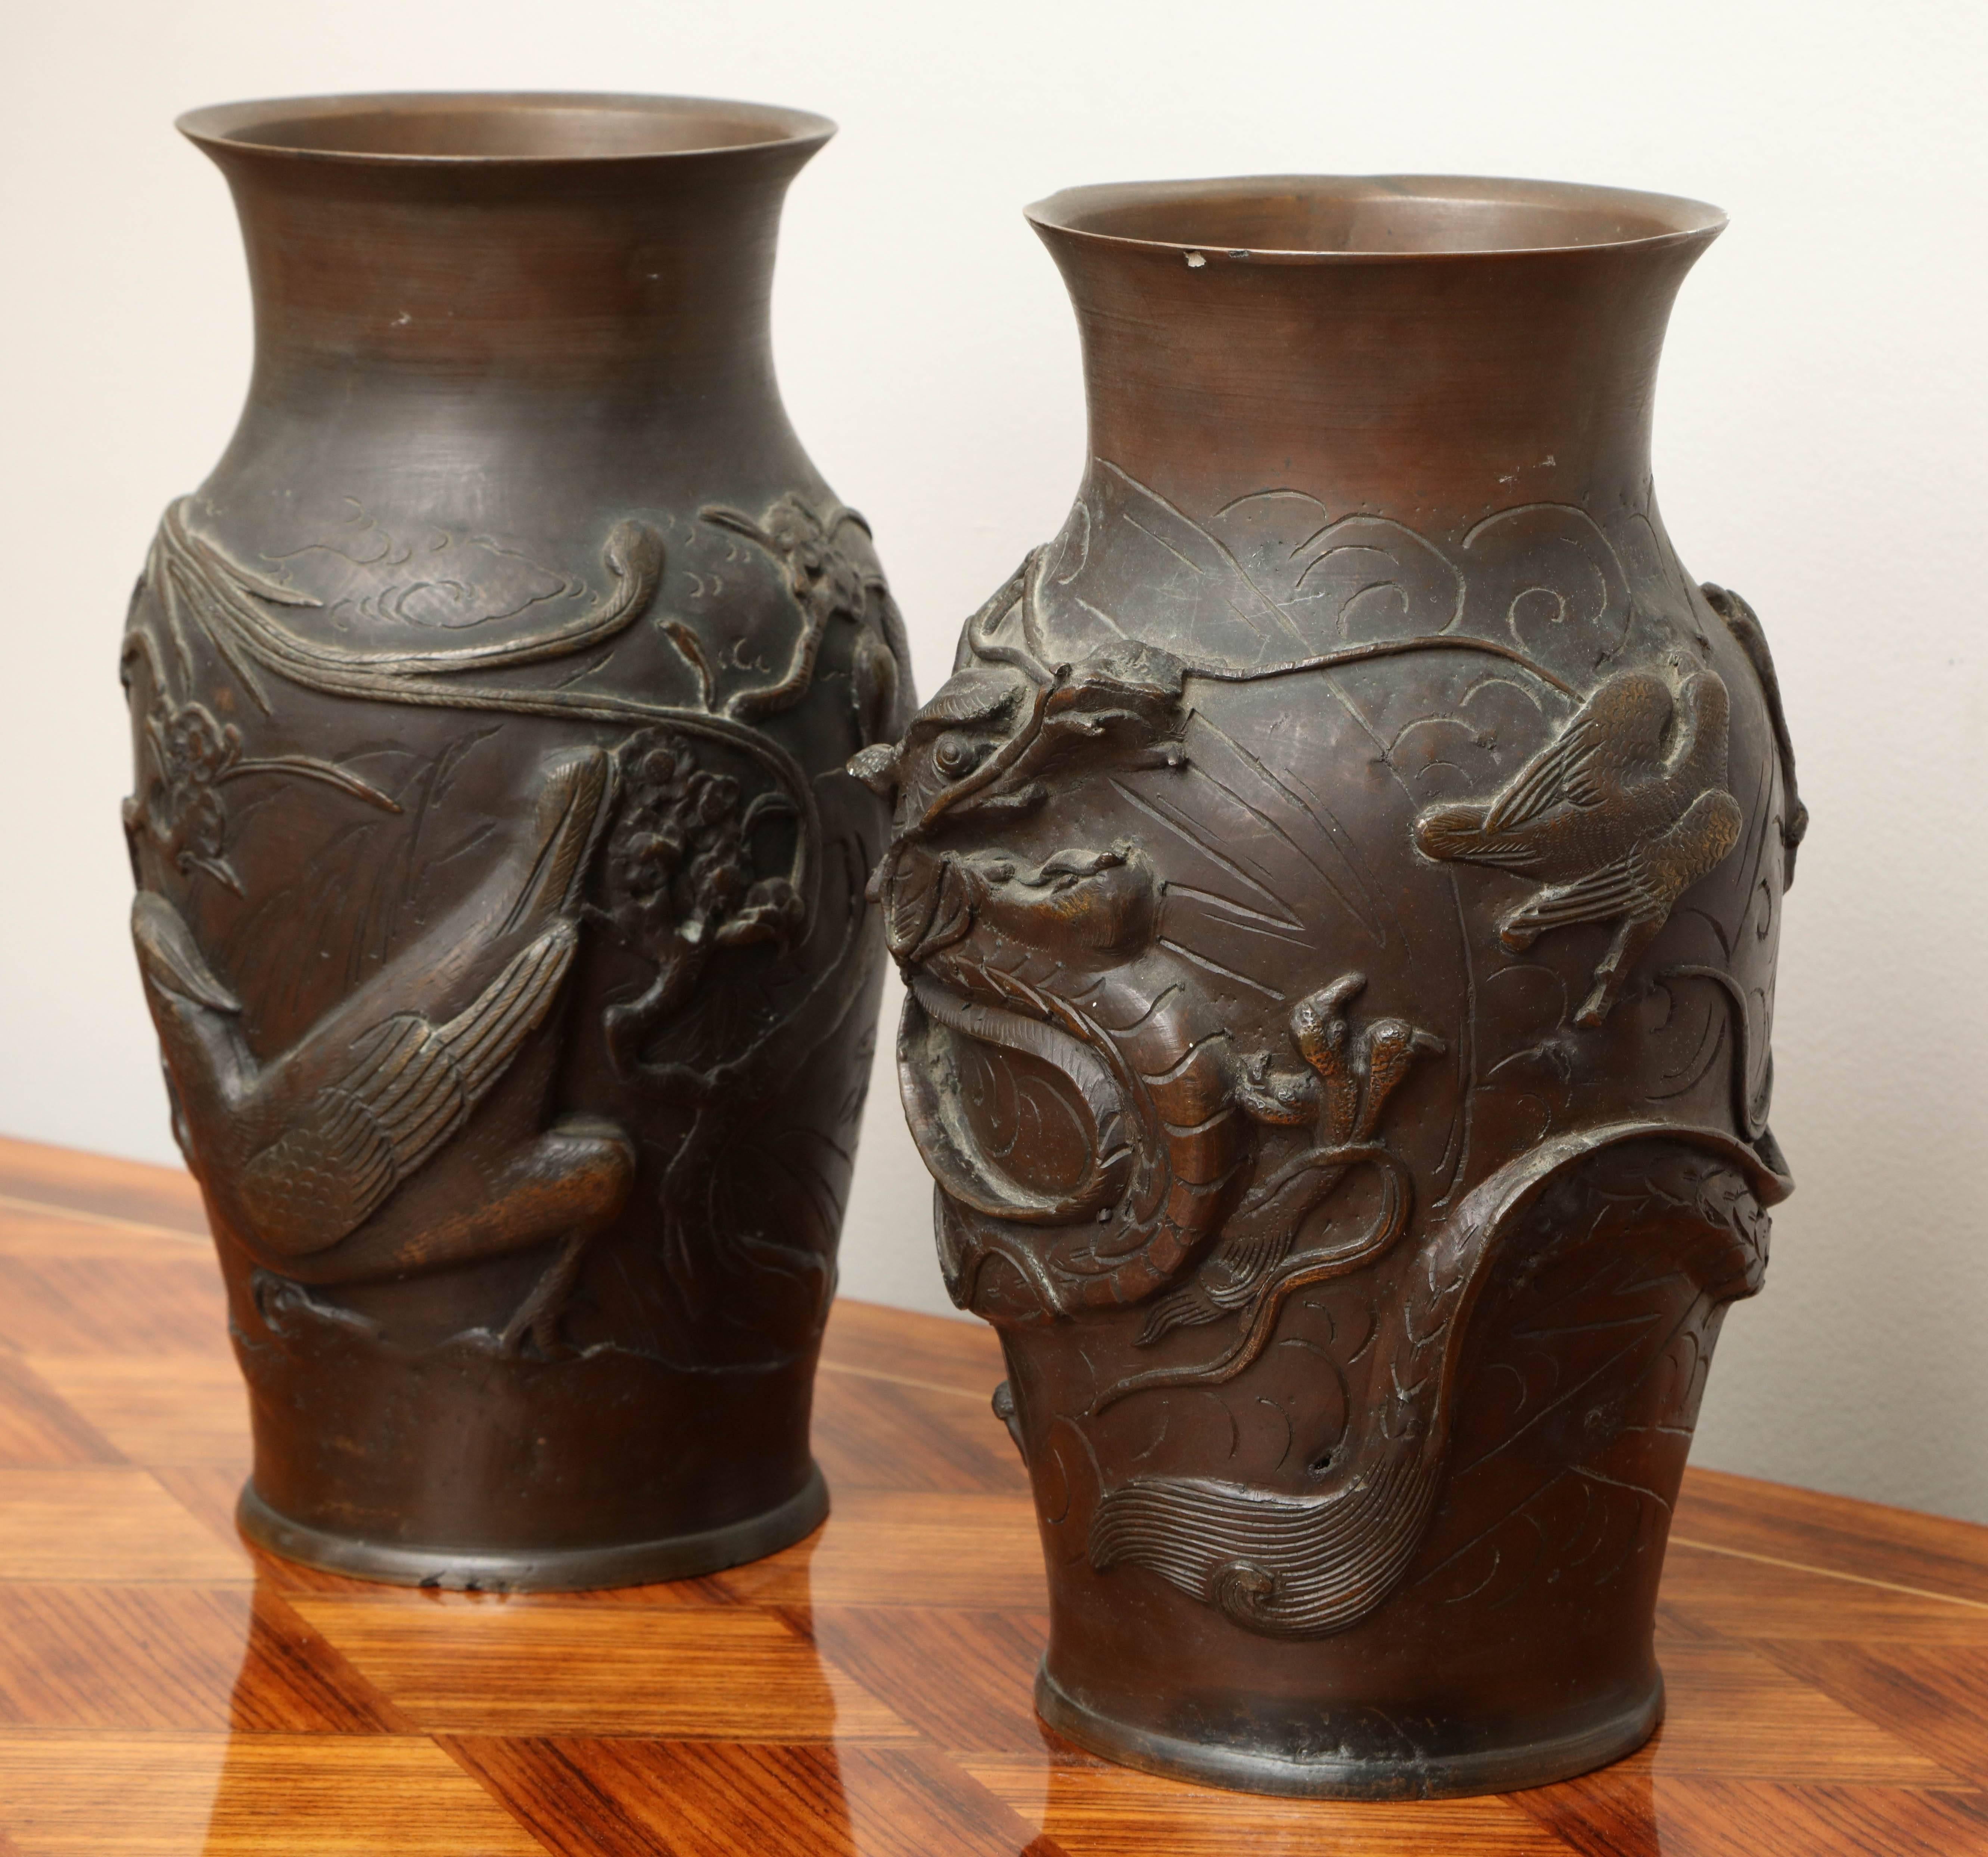 Bronze Japanese urns from the late 19th century. Could be converted to table lamps. Pair available; priced and sold individually.